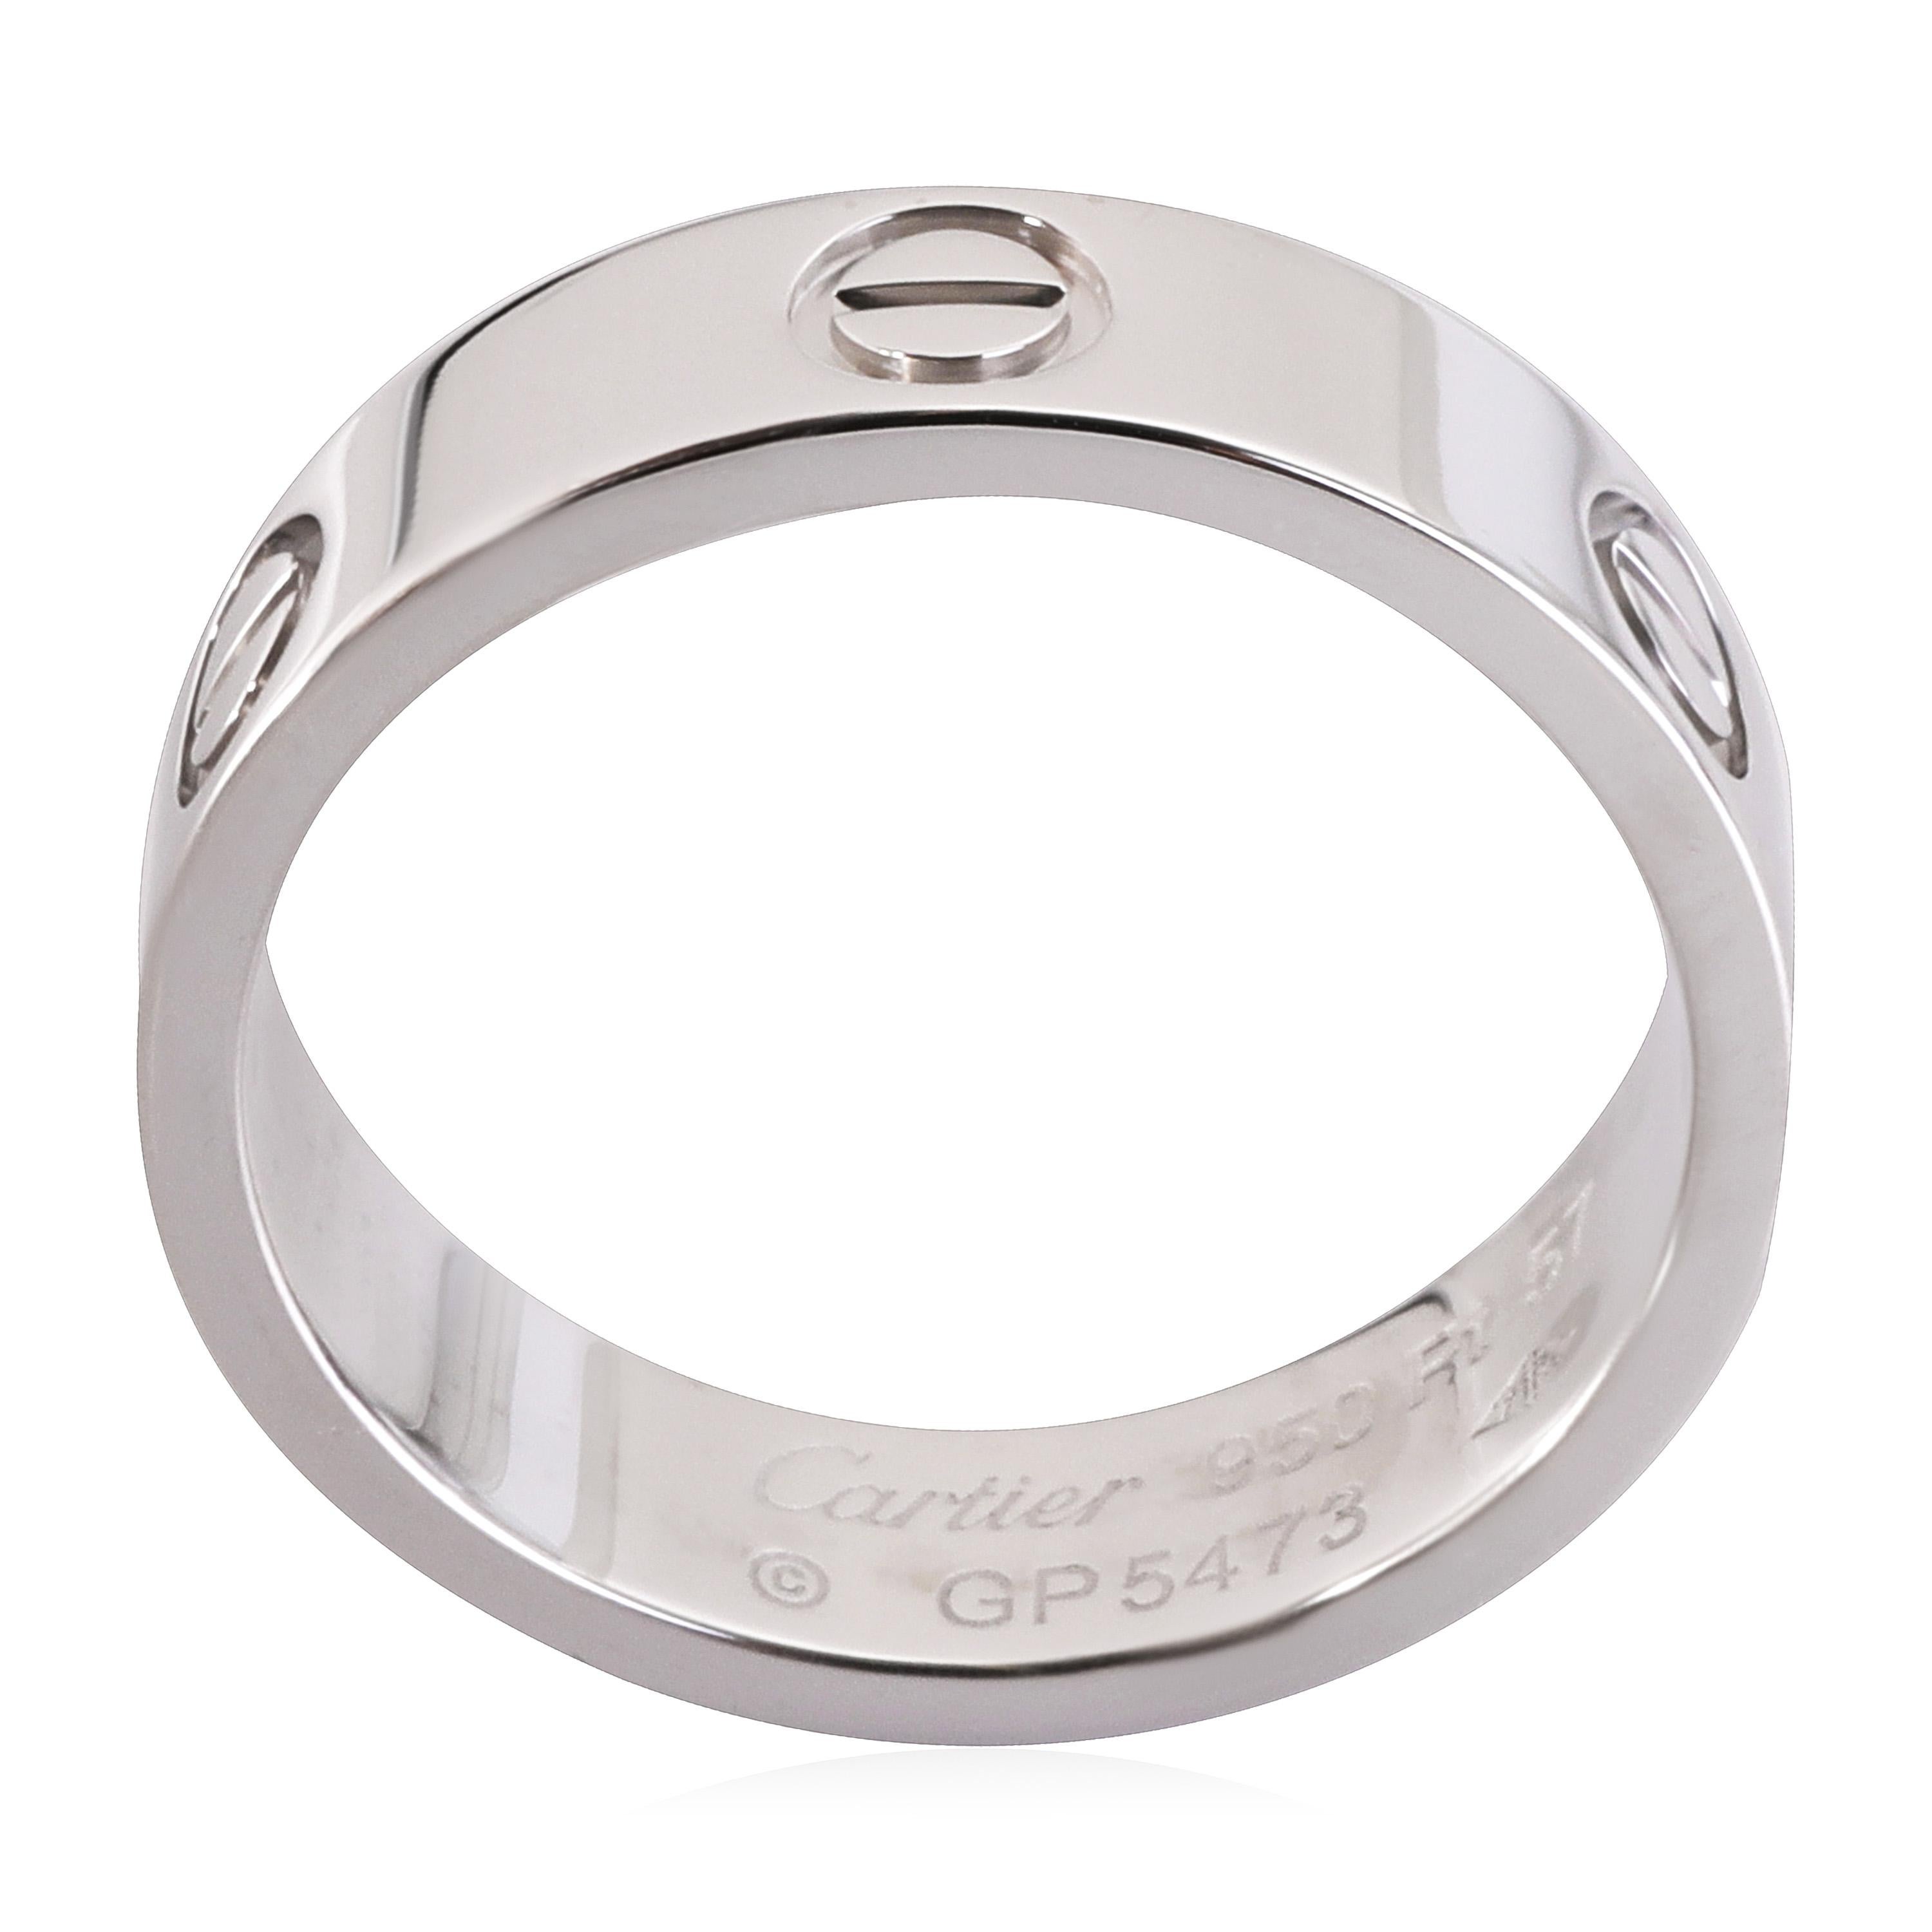 Cartier Love Ring in 950 Platinum

PRIMARY DETAILS
SKU: 119558
Listing Title: Cartier Love Ring in 950 Platinum
Condition Description: Retails for 4000 USD. In excellent condition and recently polished. Ring size is 8.0. Cartier size 57.
Brand: